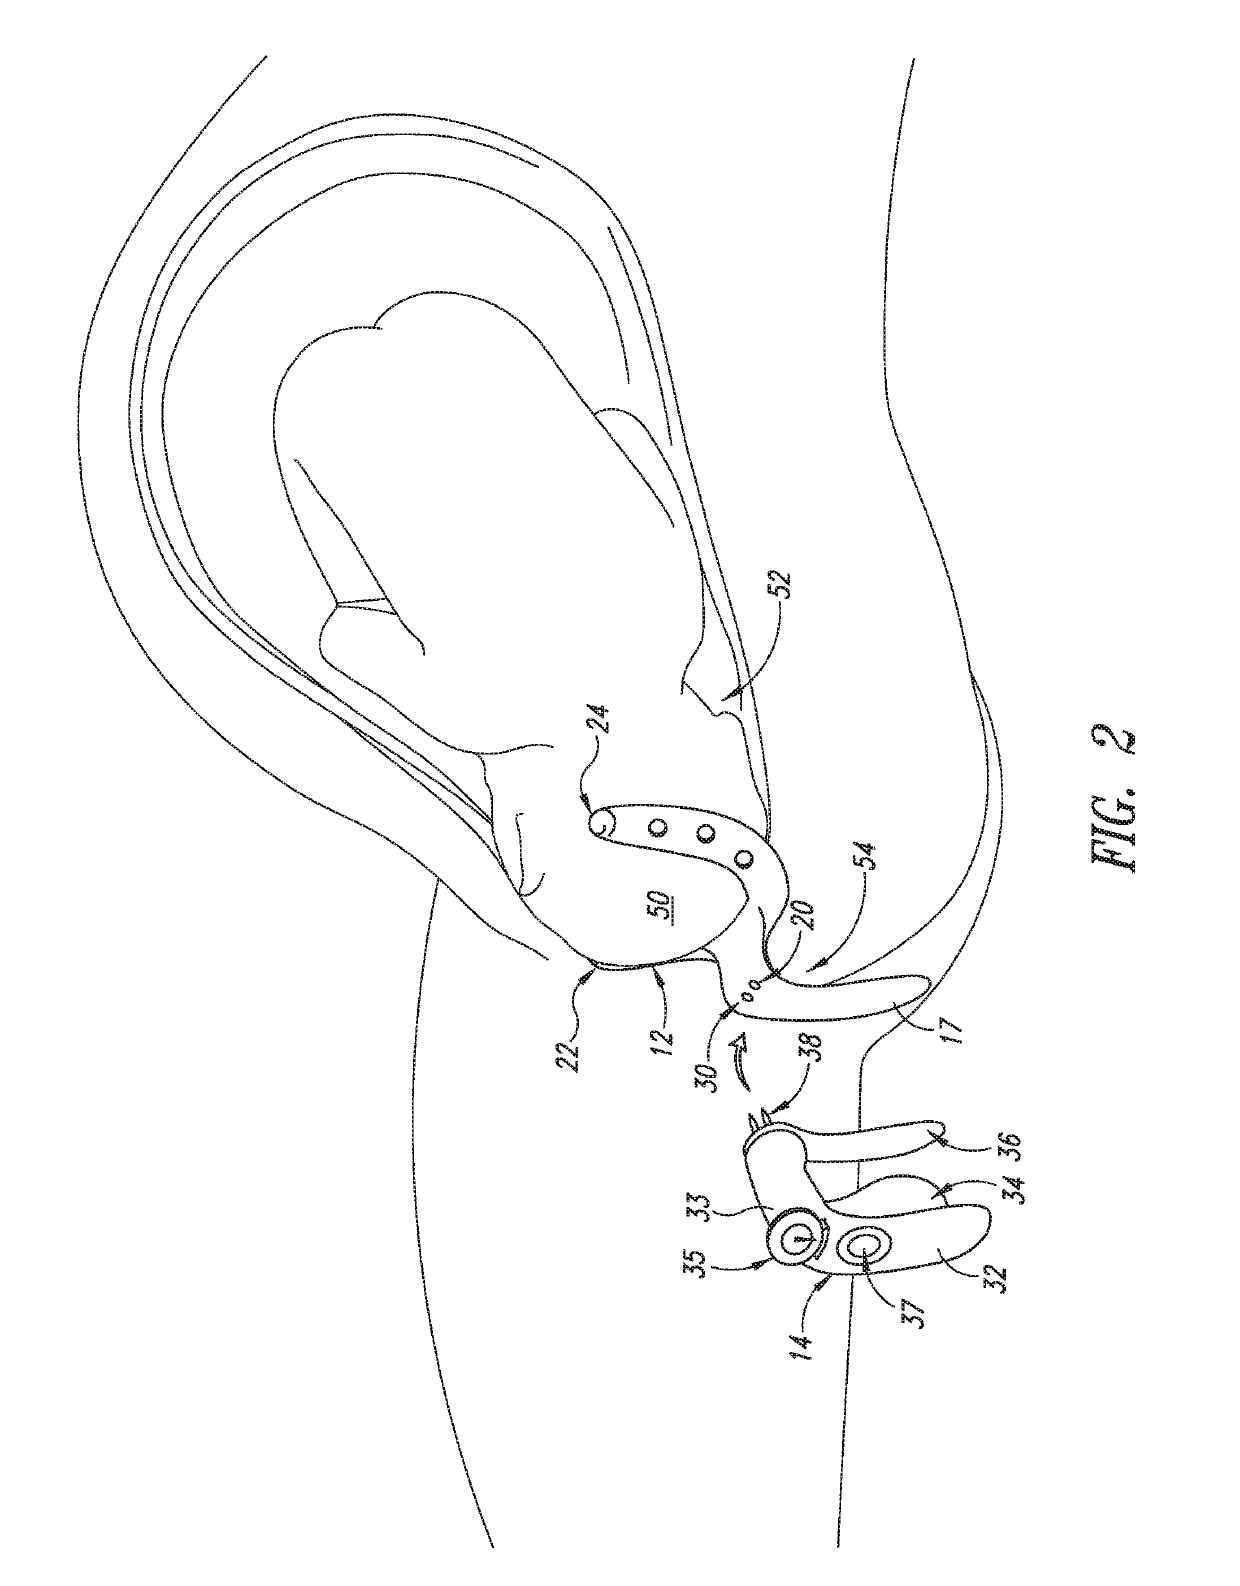 Apparatus to protect the pelvic floor during vaginal childbirth